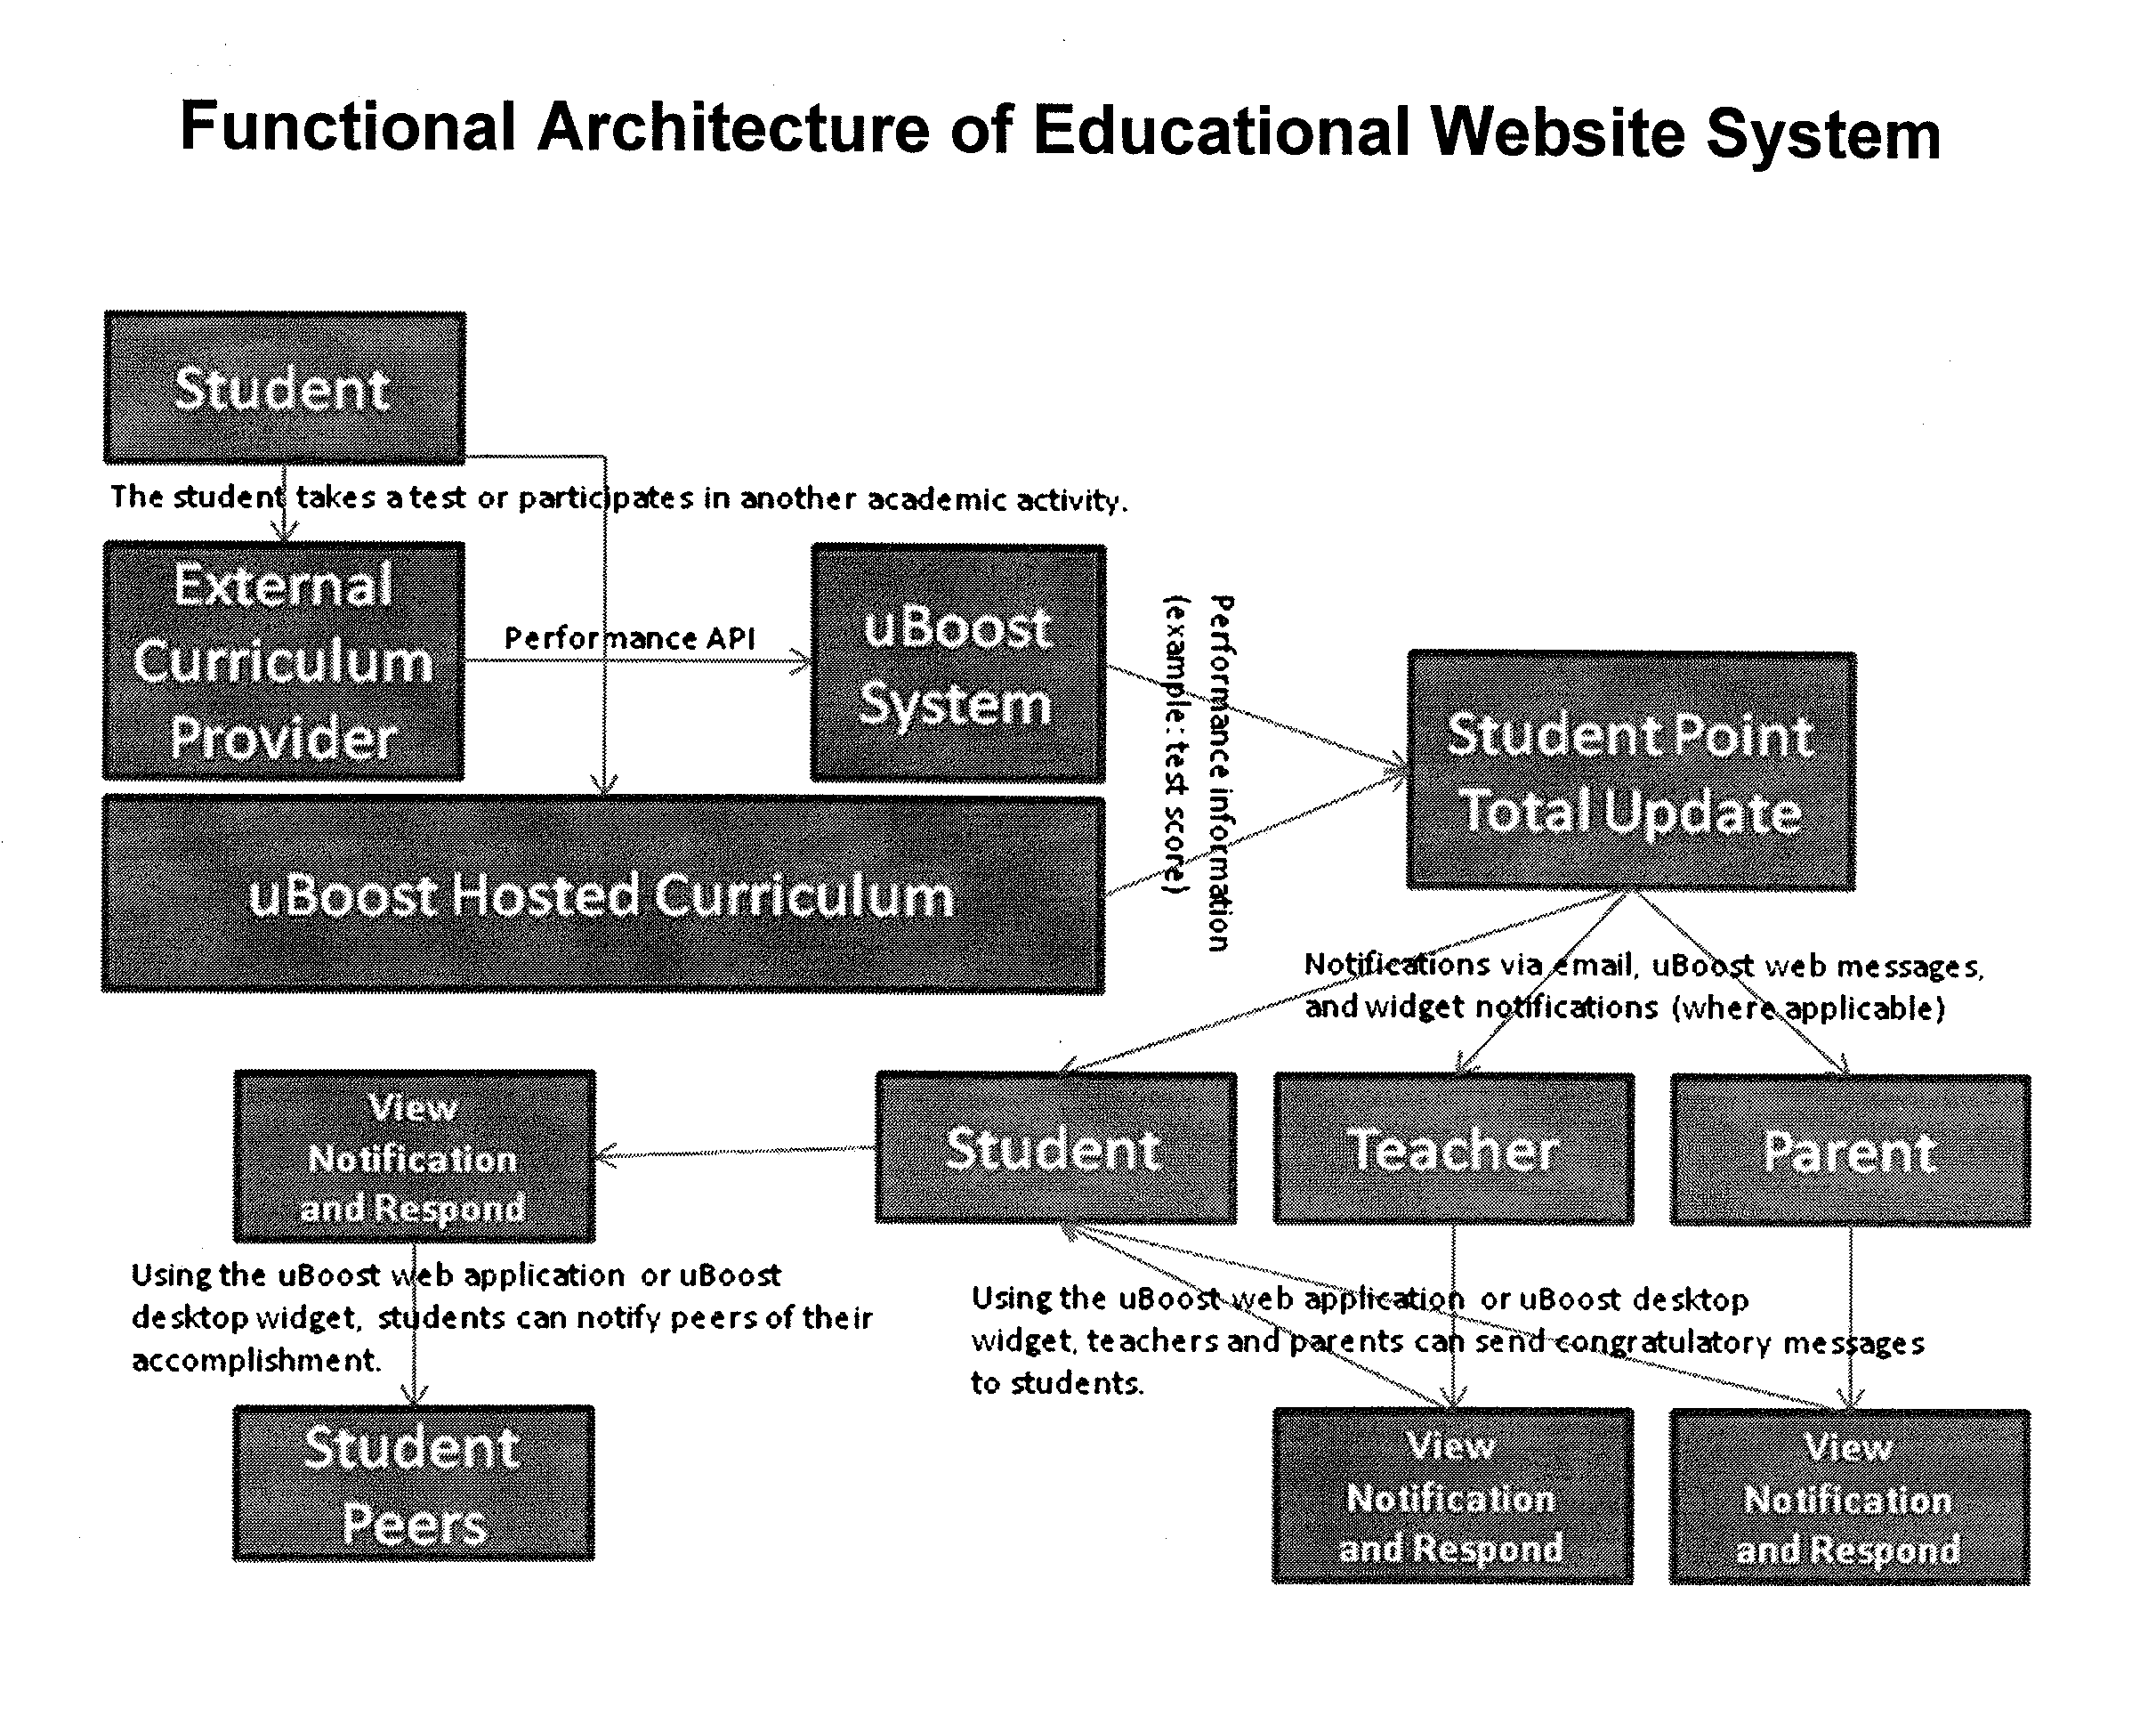 System for operating educational website for promoting parent and teacher involvement